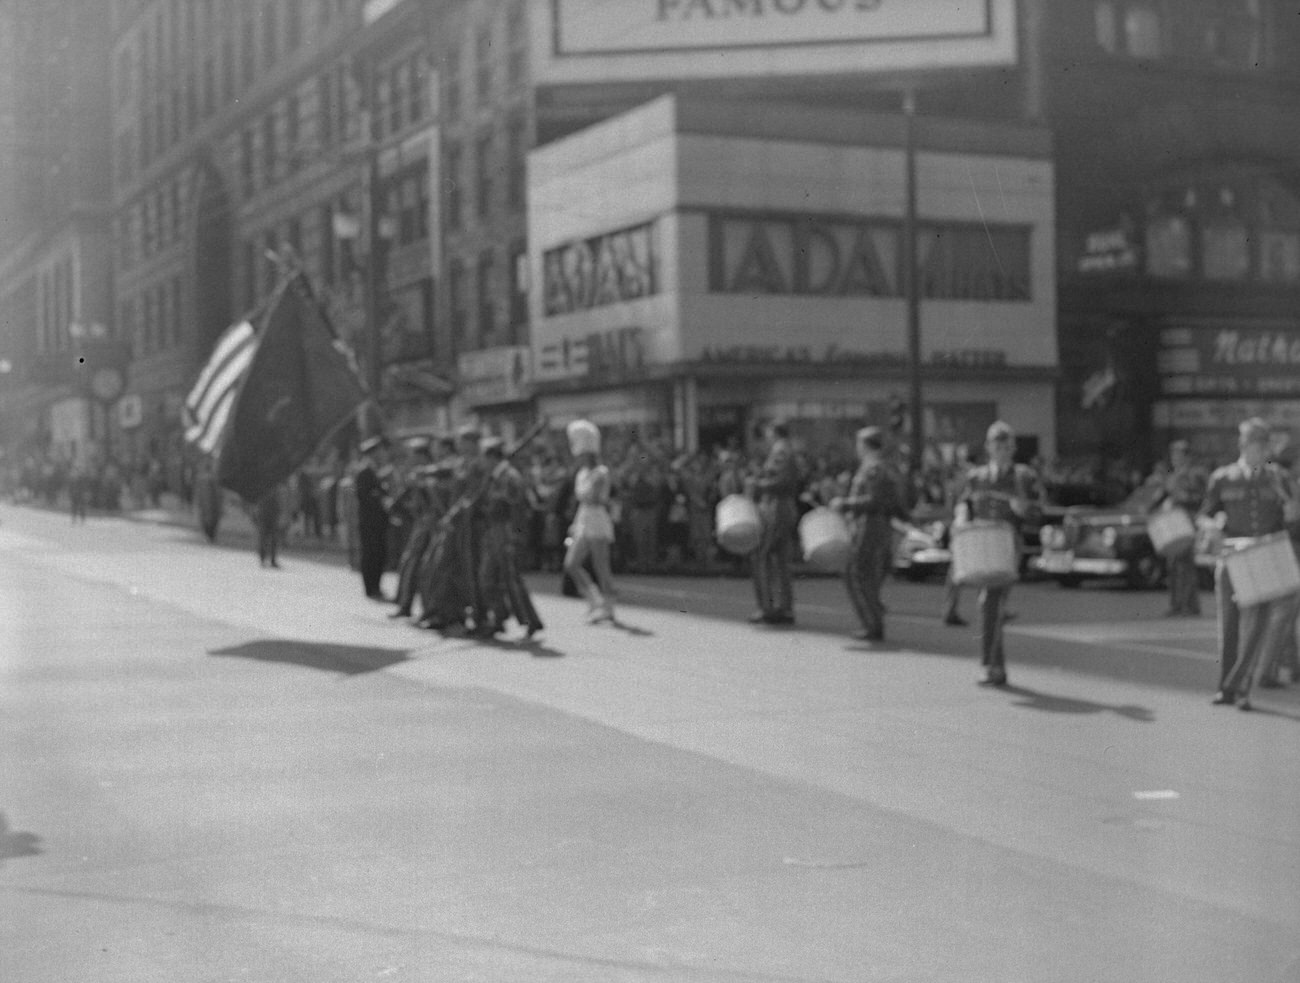 AmVets Post No 8 band marching downtown, featuring Adam Hat Store and Nathan's Gift Shop, 1948.